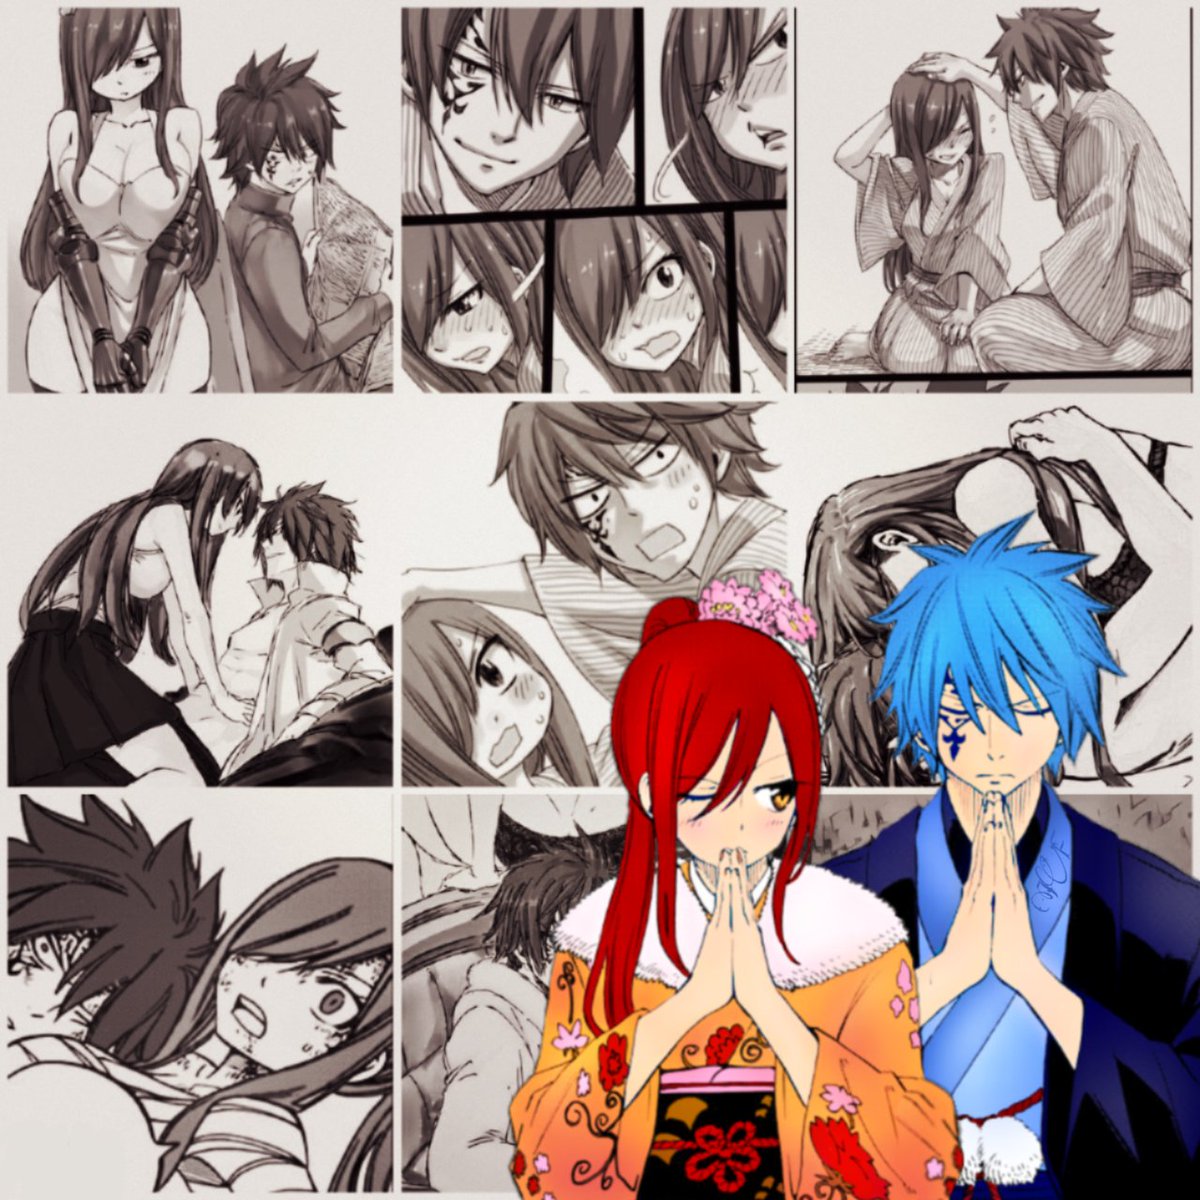 Itefi Pa Twitter Jerza ジェラエルの日 Jerzaday ジェラエル週間 Jerzaweek ジェラエル Jerza ジェラール Jellal エルザ Erza